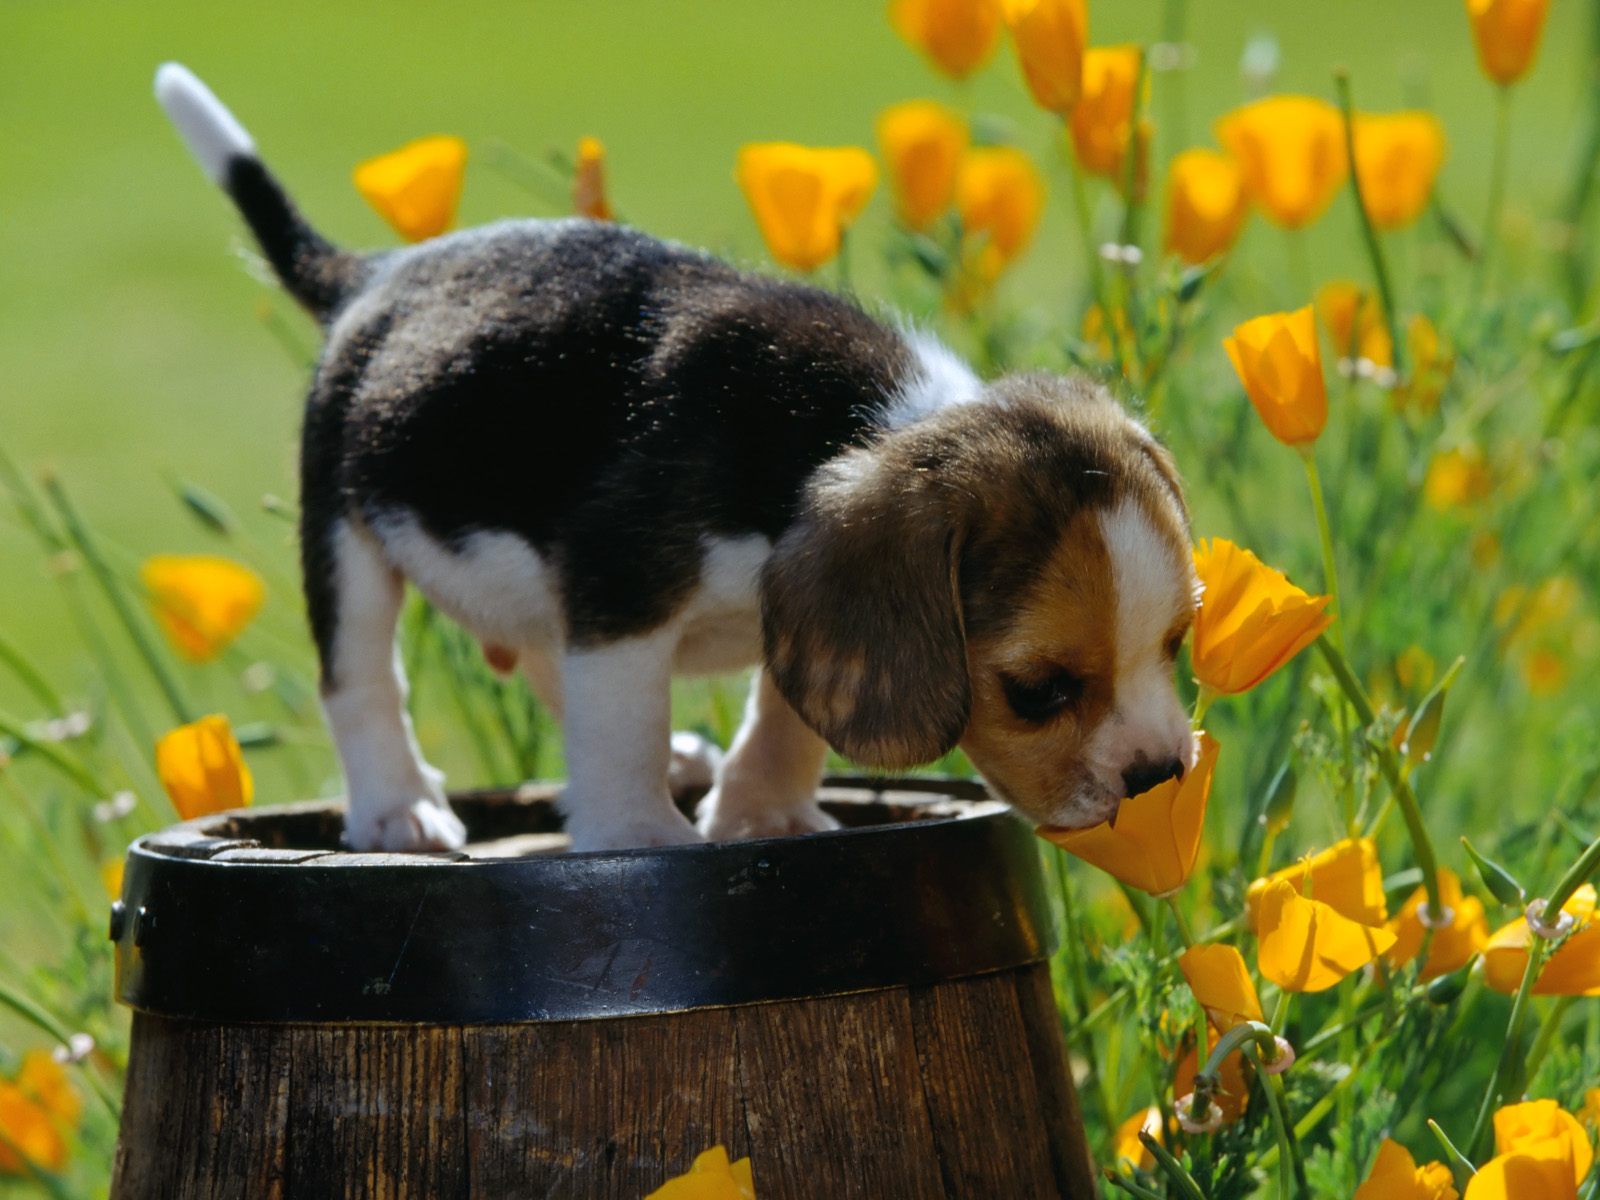  HQ Spring Scents Beagle Puppy Wallpaper   HQ Wallpapers 1600x1200